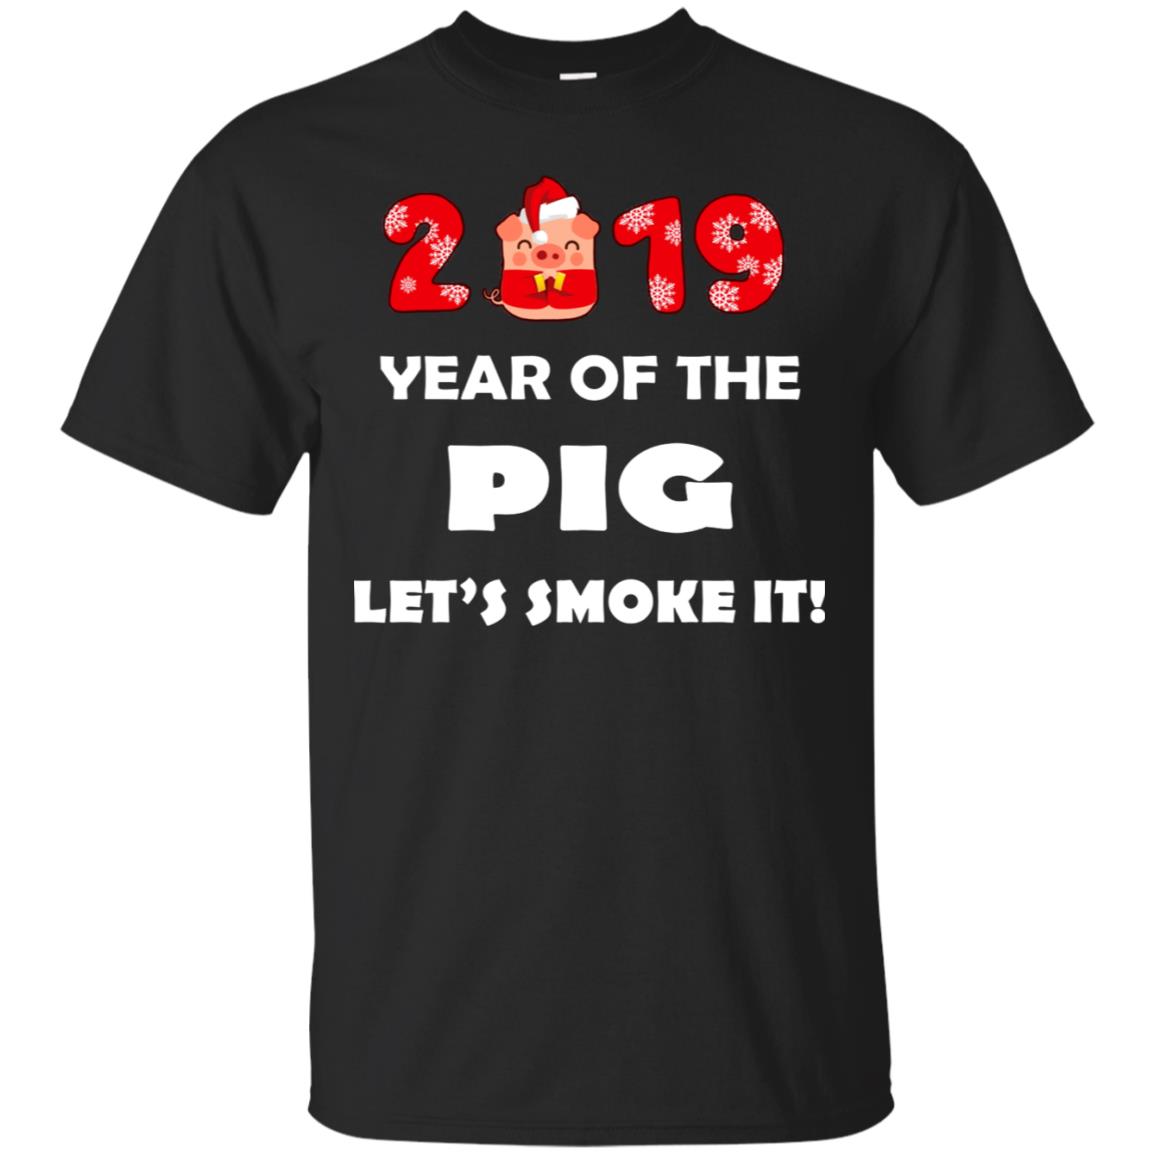 2019 Year Of The Pig Lets Smork It New Year Gift Shirt For Mens Or WomensG200 Gildan Ultra Cotton T-Shirt